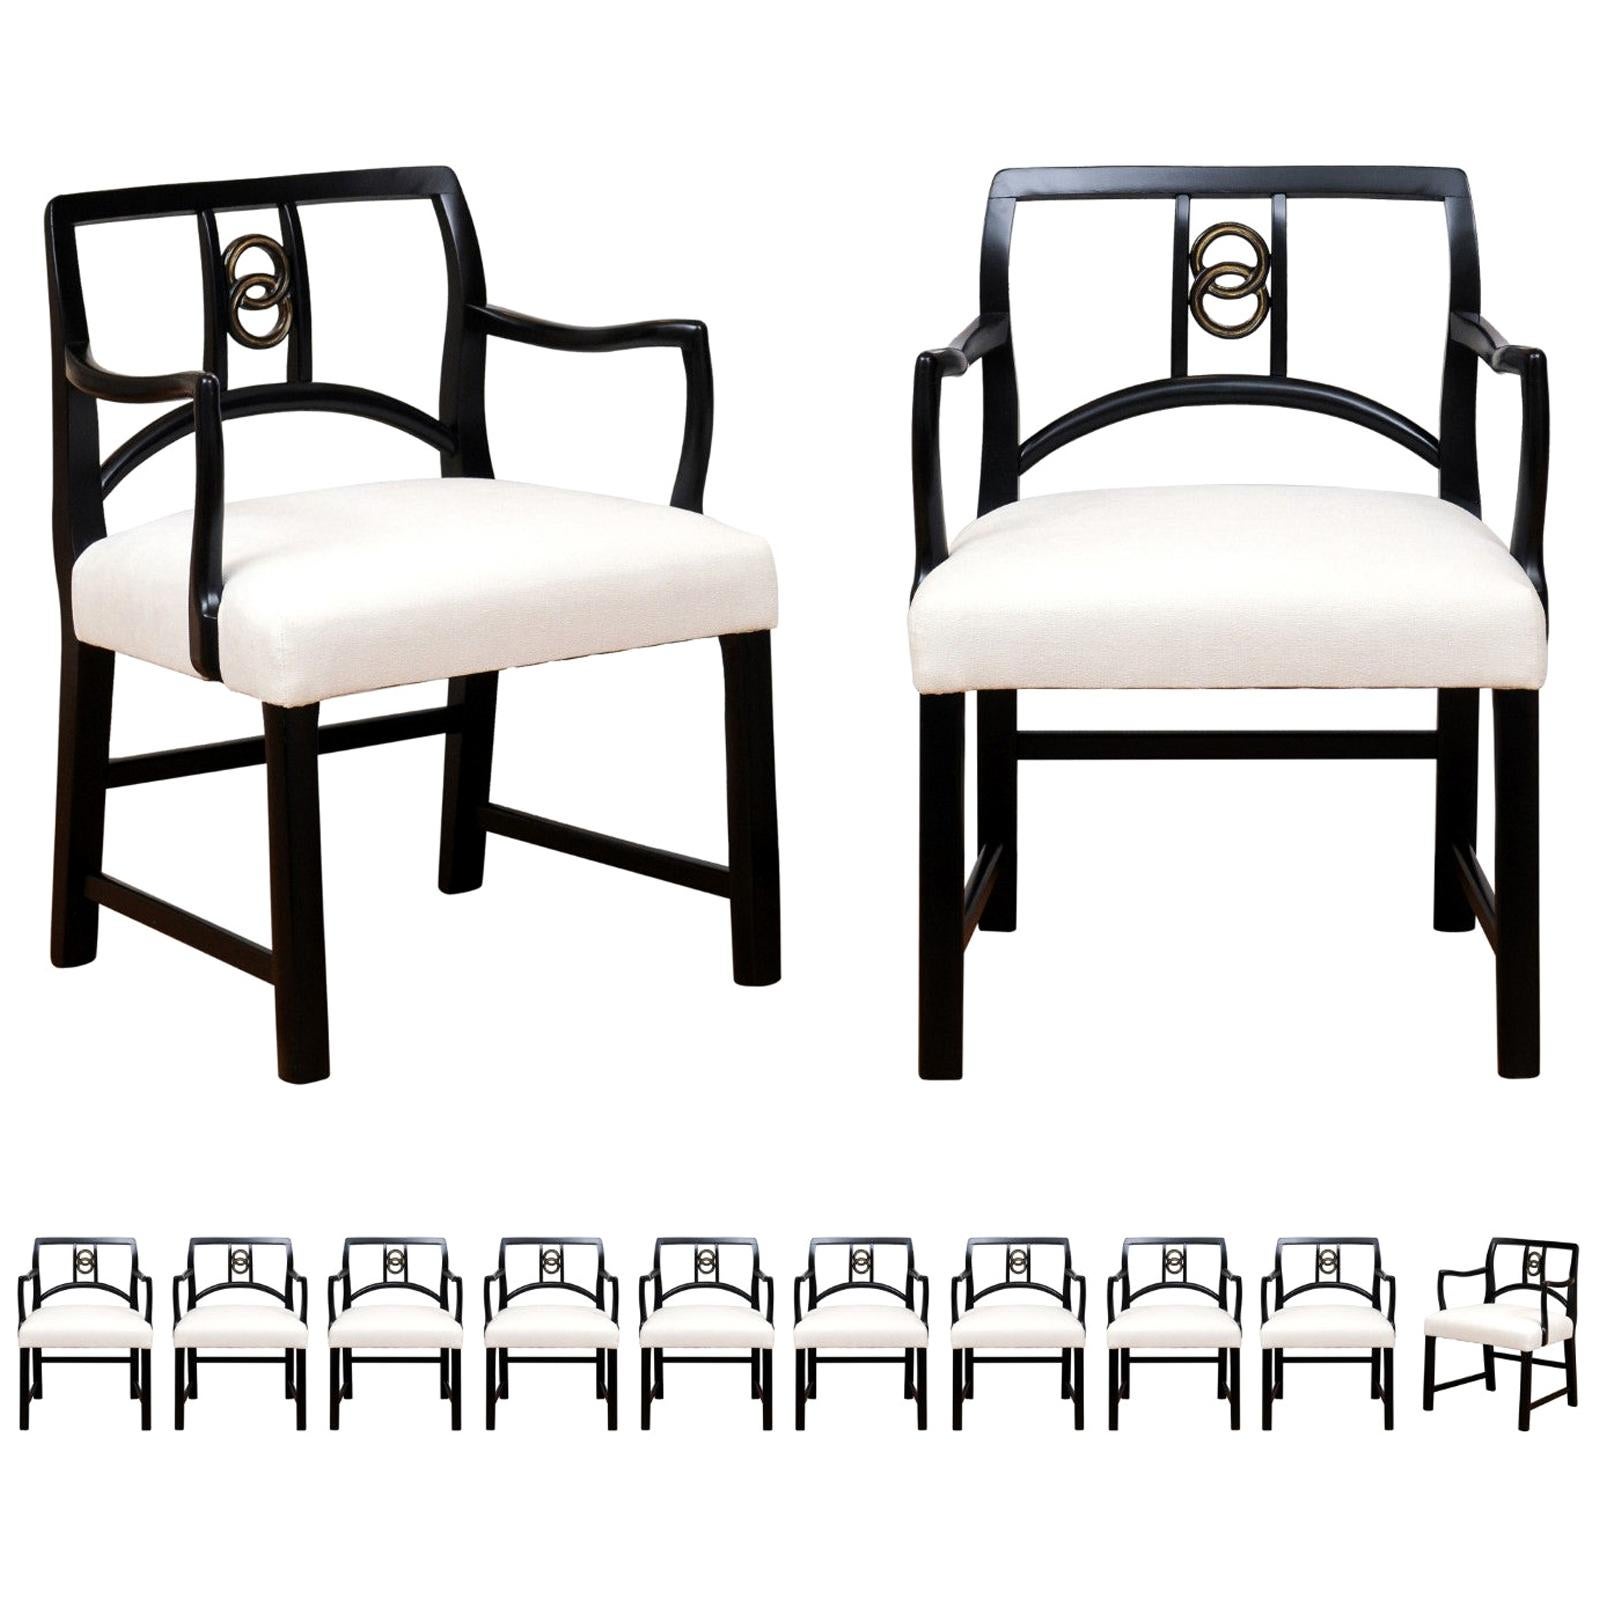 All Arms, Chic Set of 12 Dining Chairs by Michael Taylor for Baker, circa 1960 For Sale